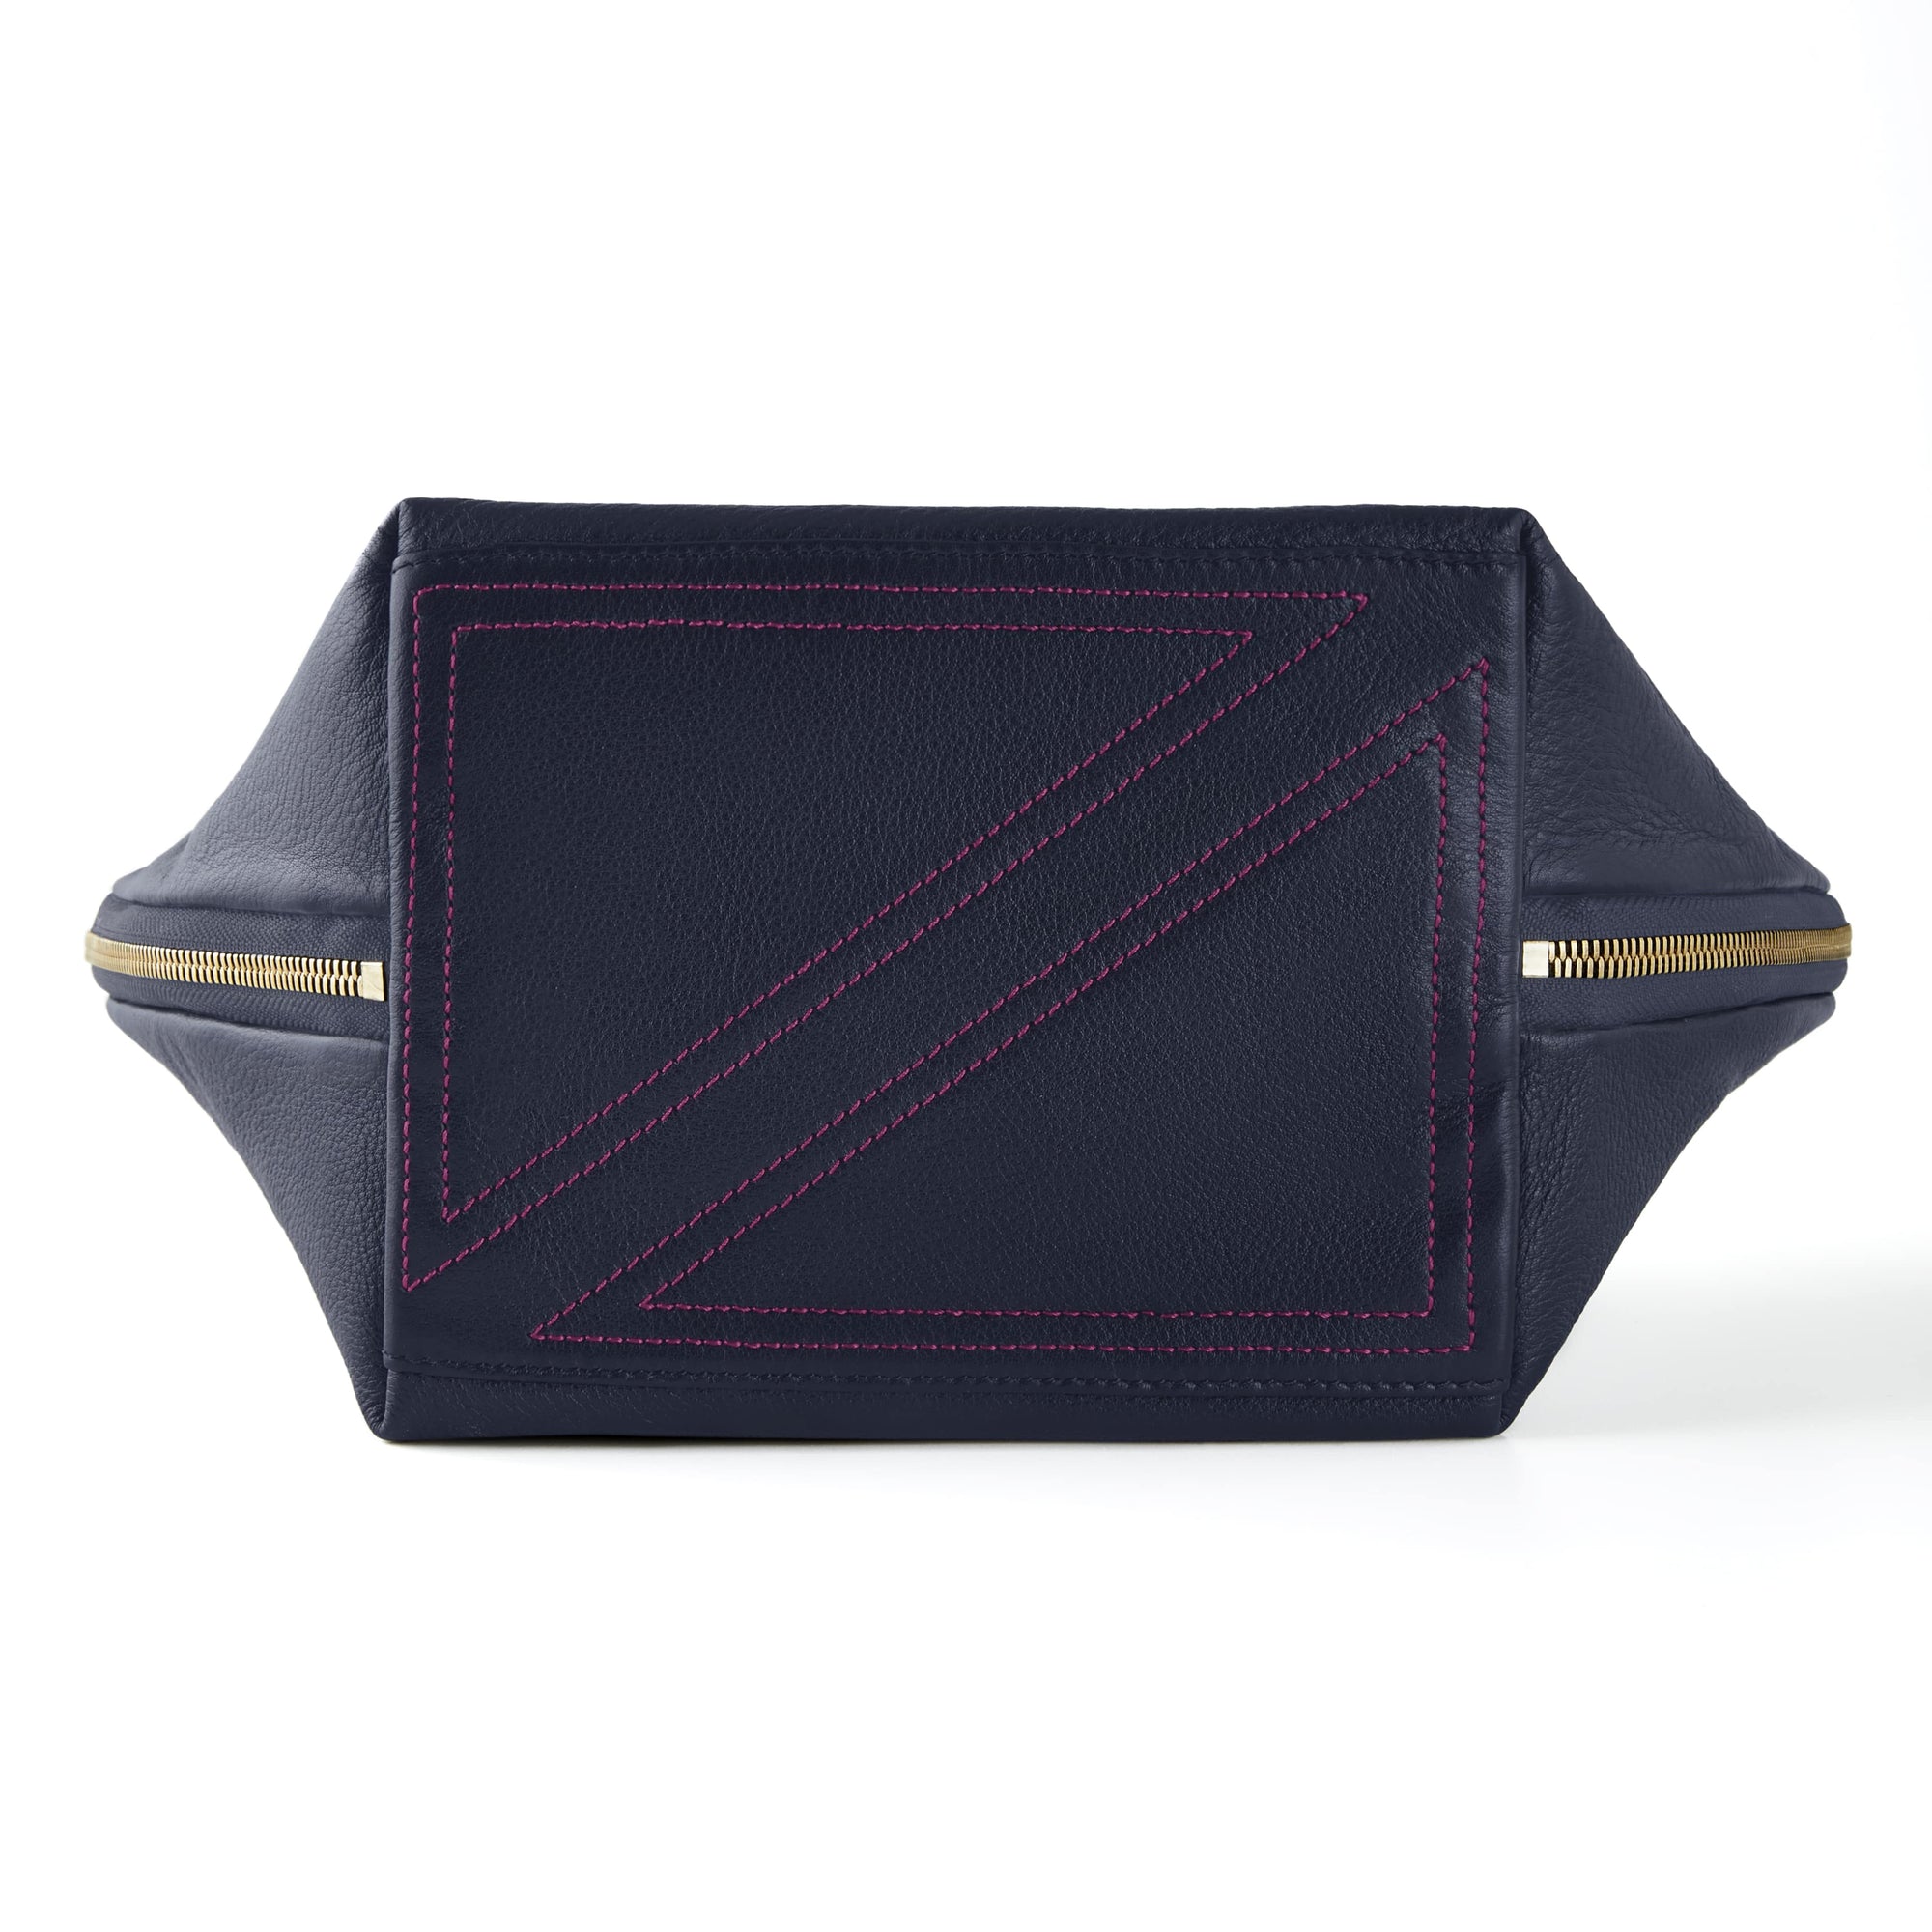 color: all+ Luxurious Navy Leather with Pink Interior; alt: Signature Medium Size Makeup Bag | KUSSHI